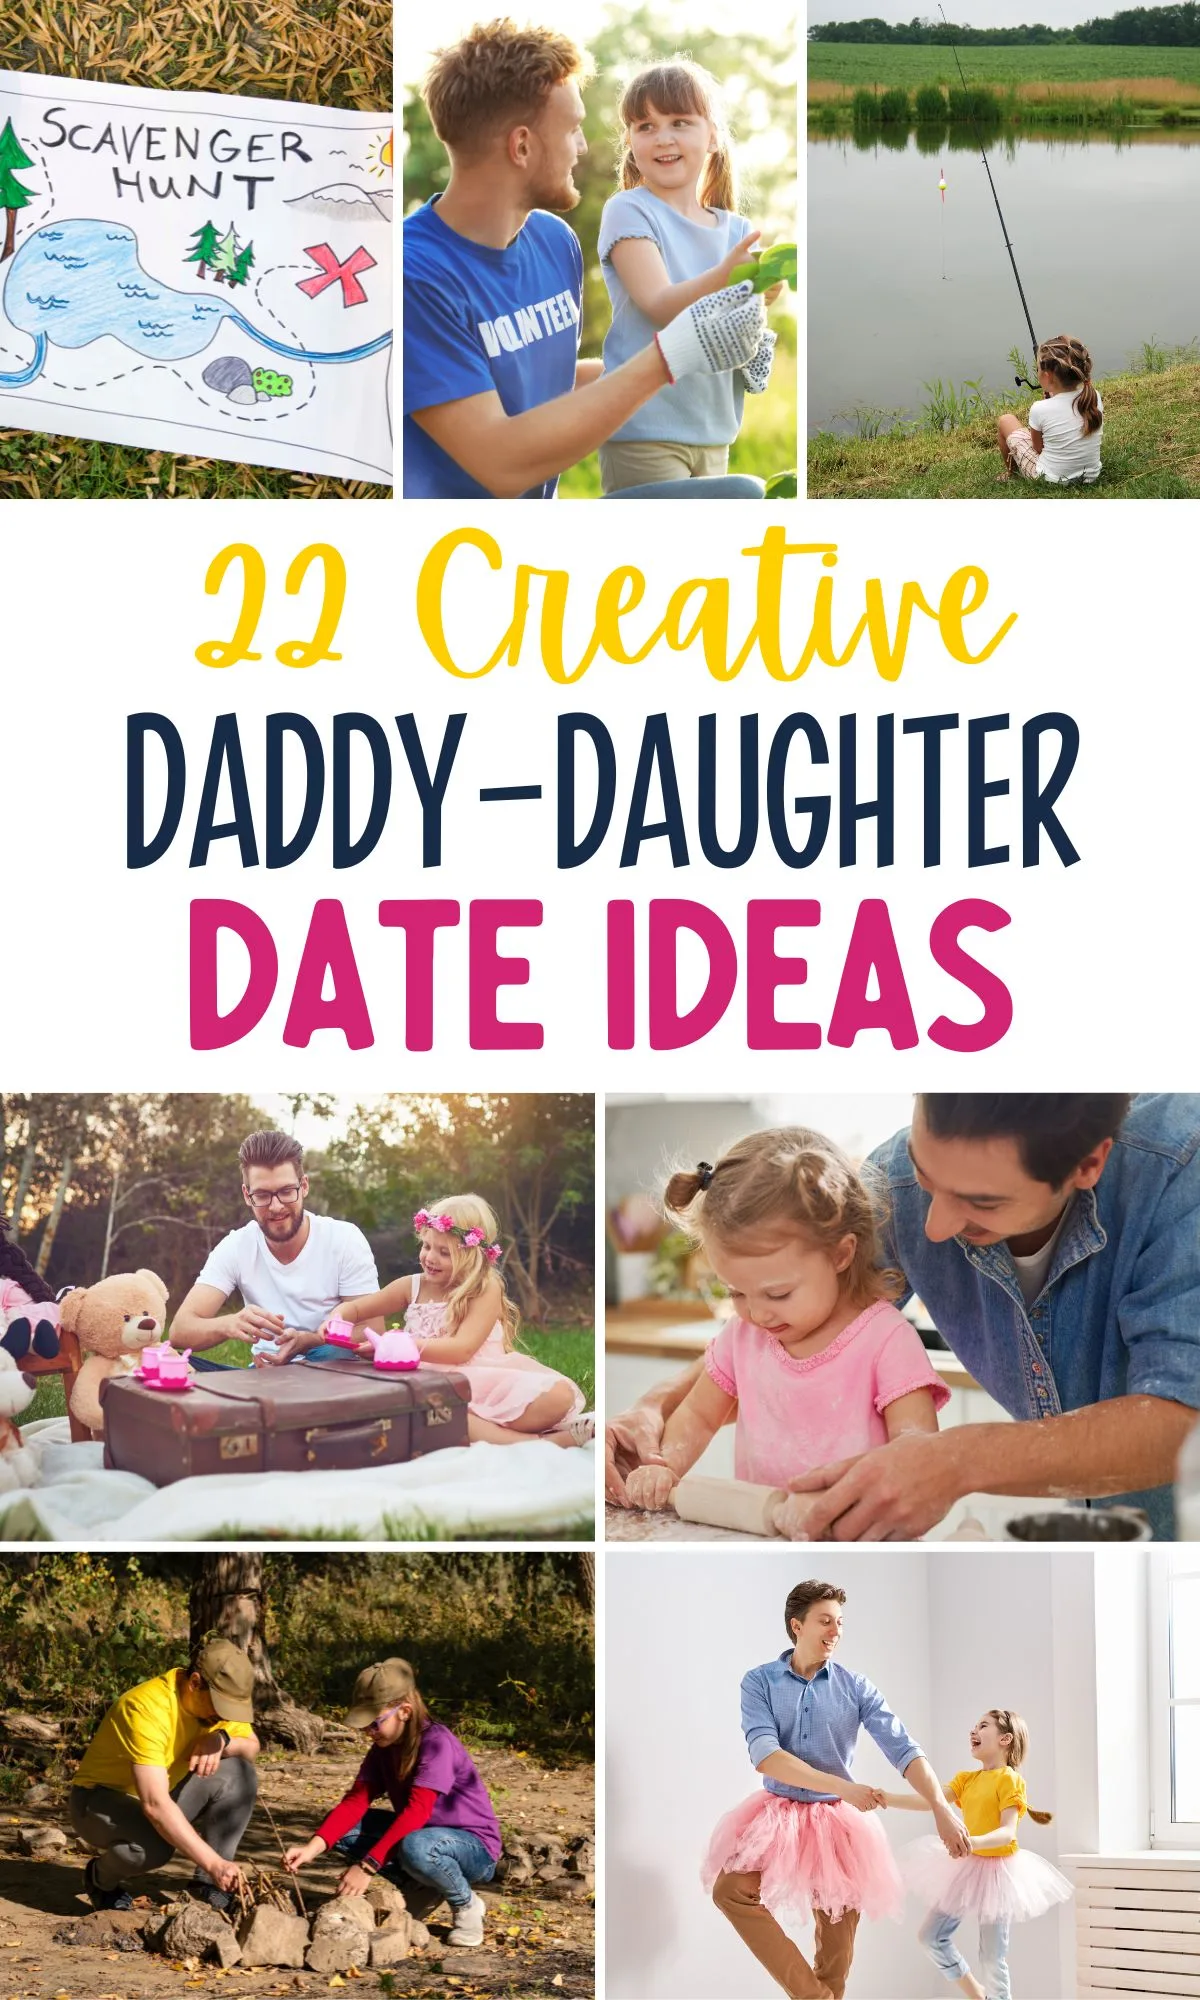 Image graphic with text that reads "22 Daddy Daughter Date Ideas" and a collage of ideas.